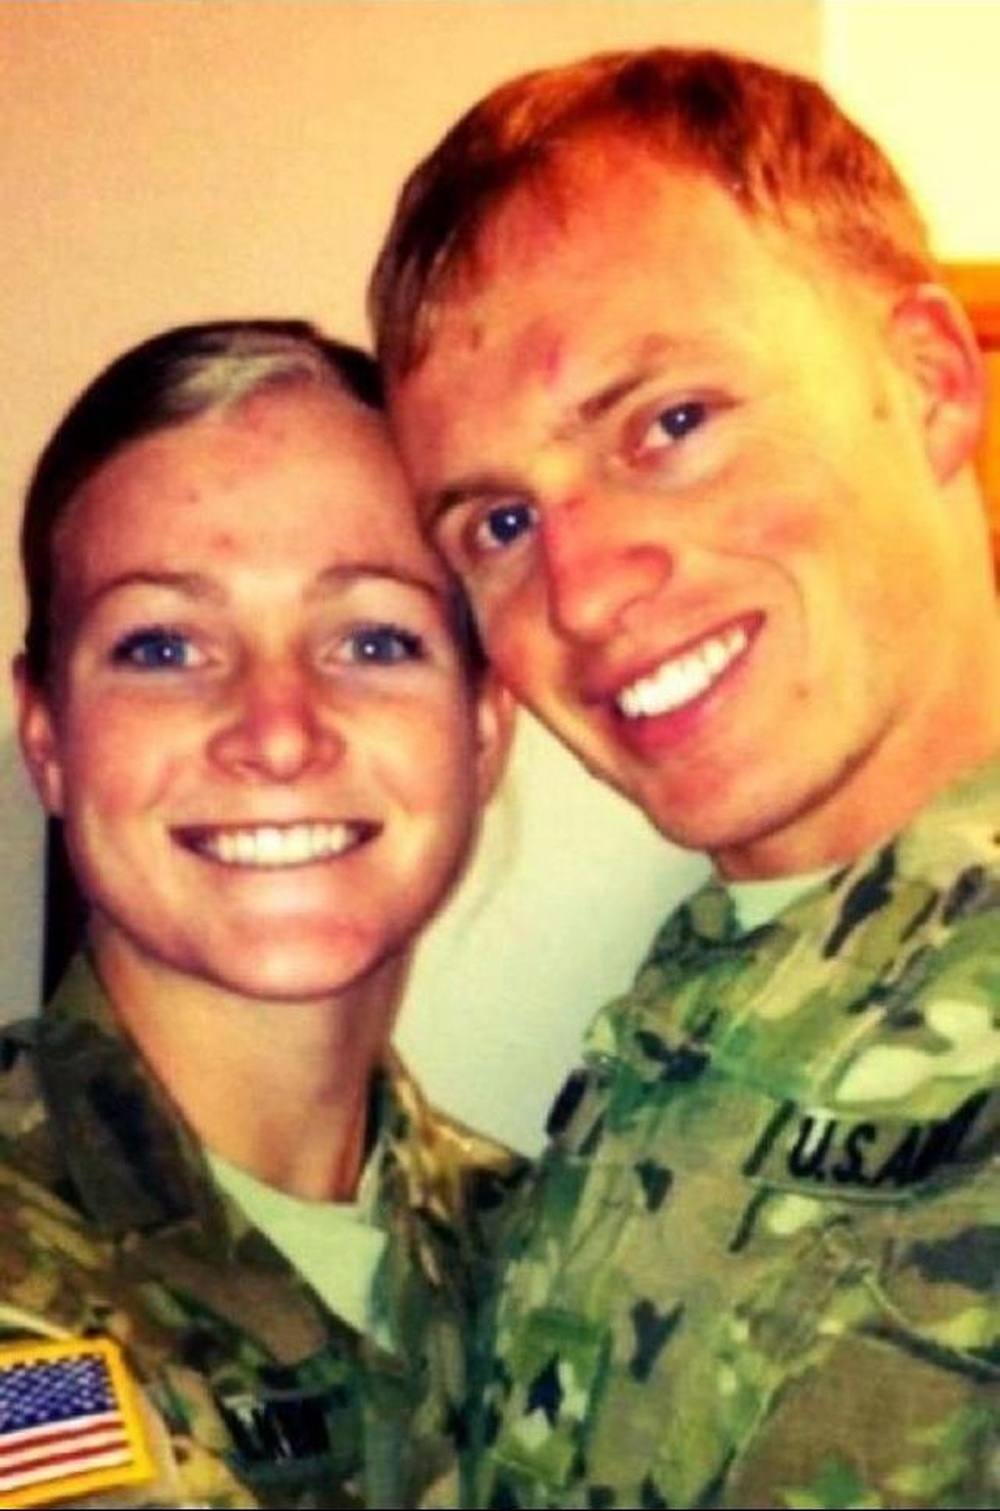 The Spartan Soldier's Love Life: Dating & The Spartan Way of Life